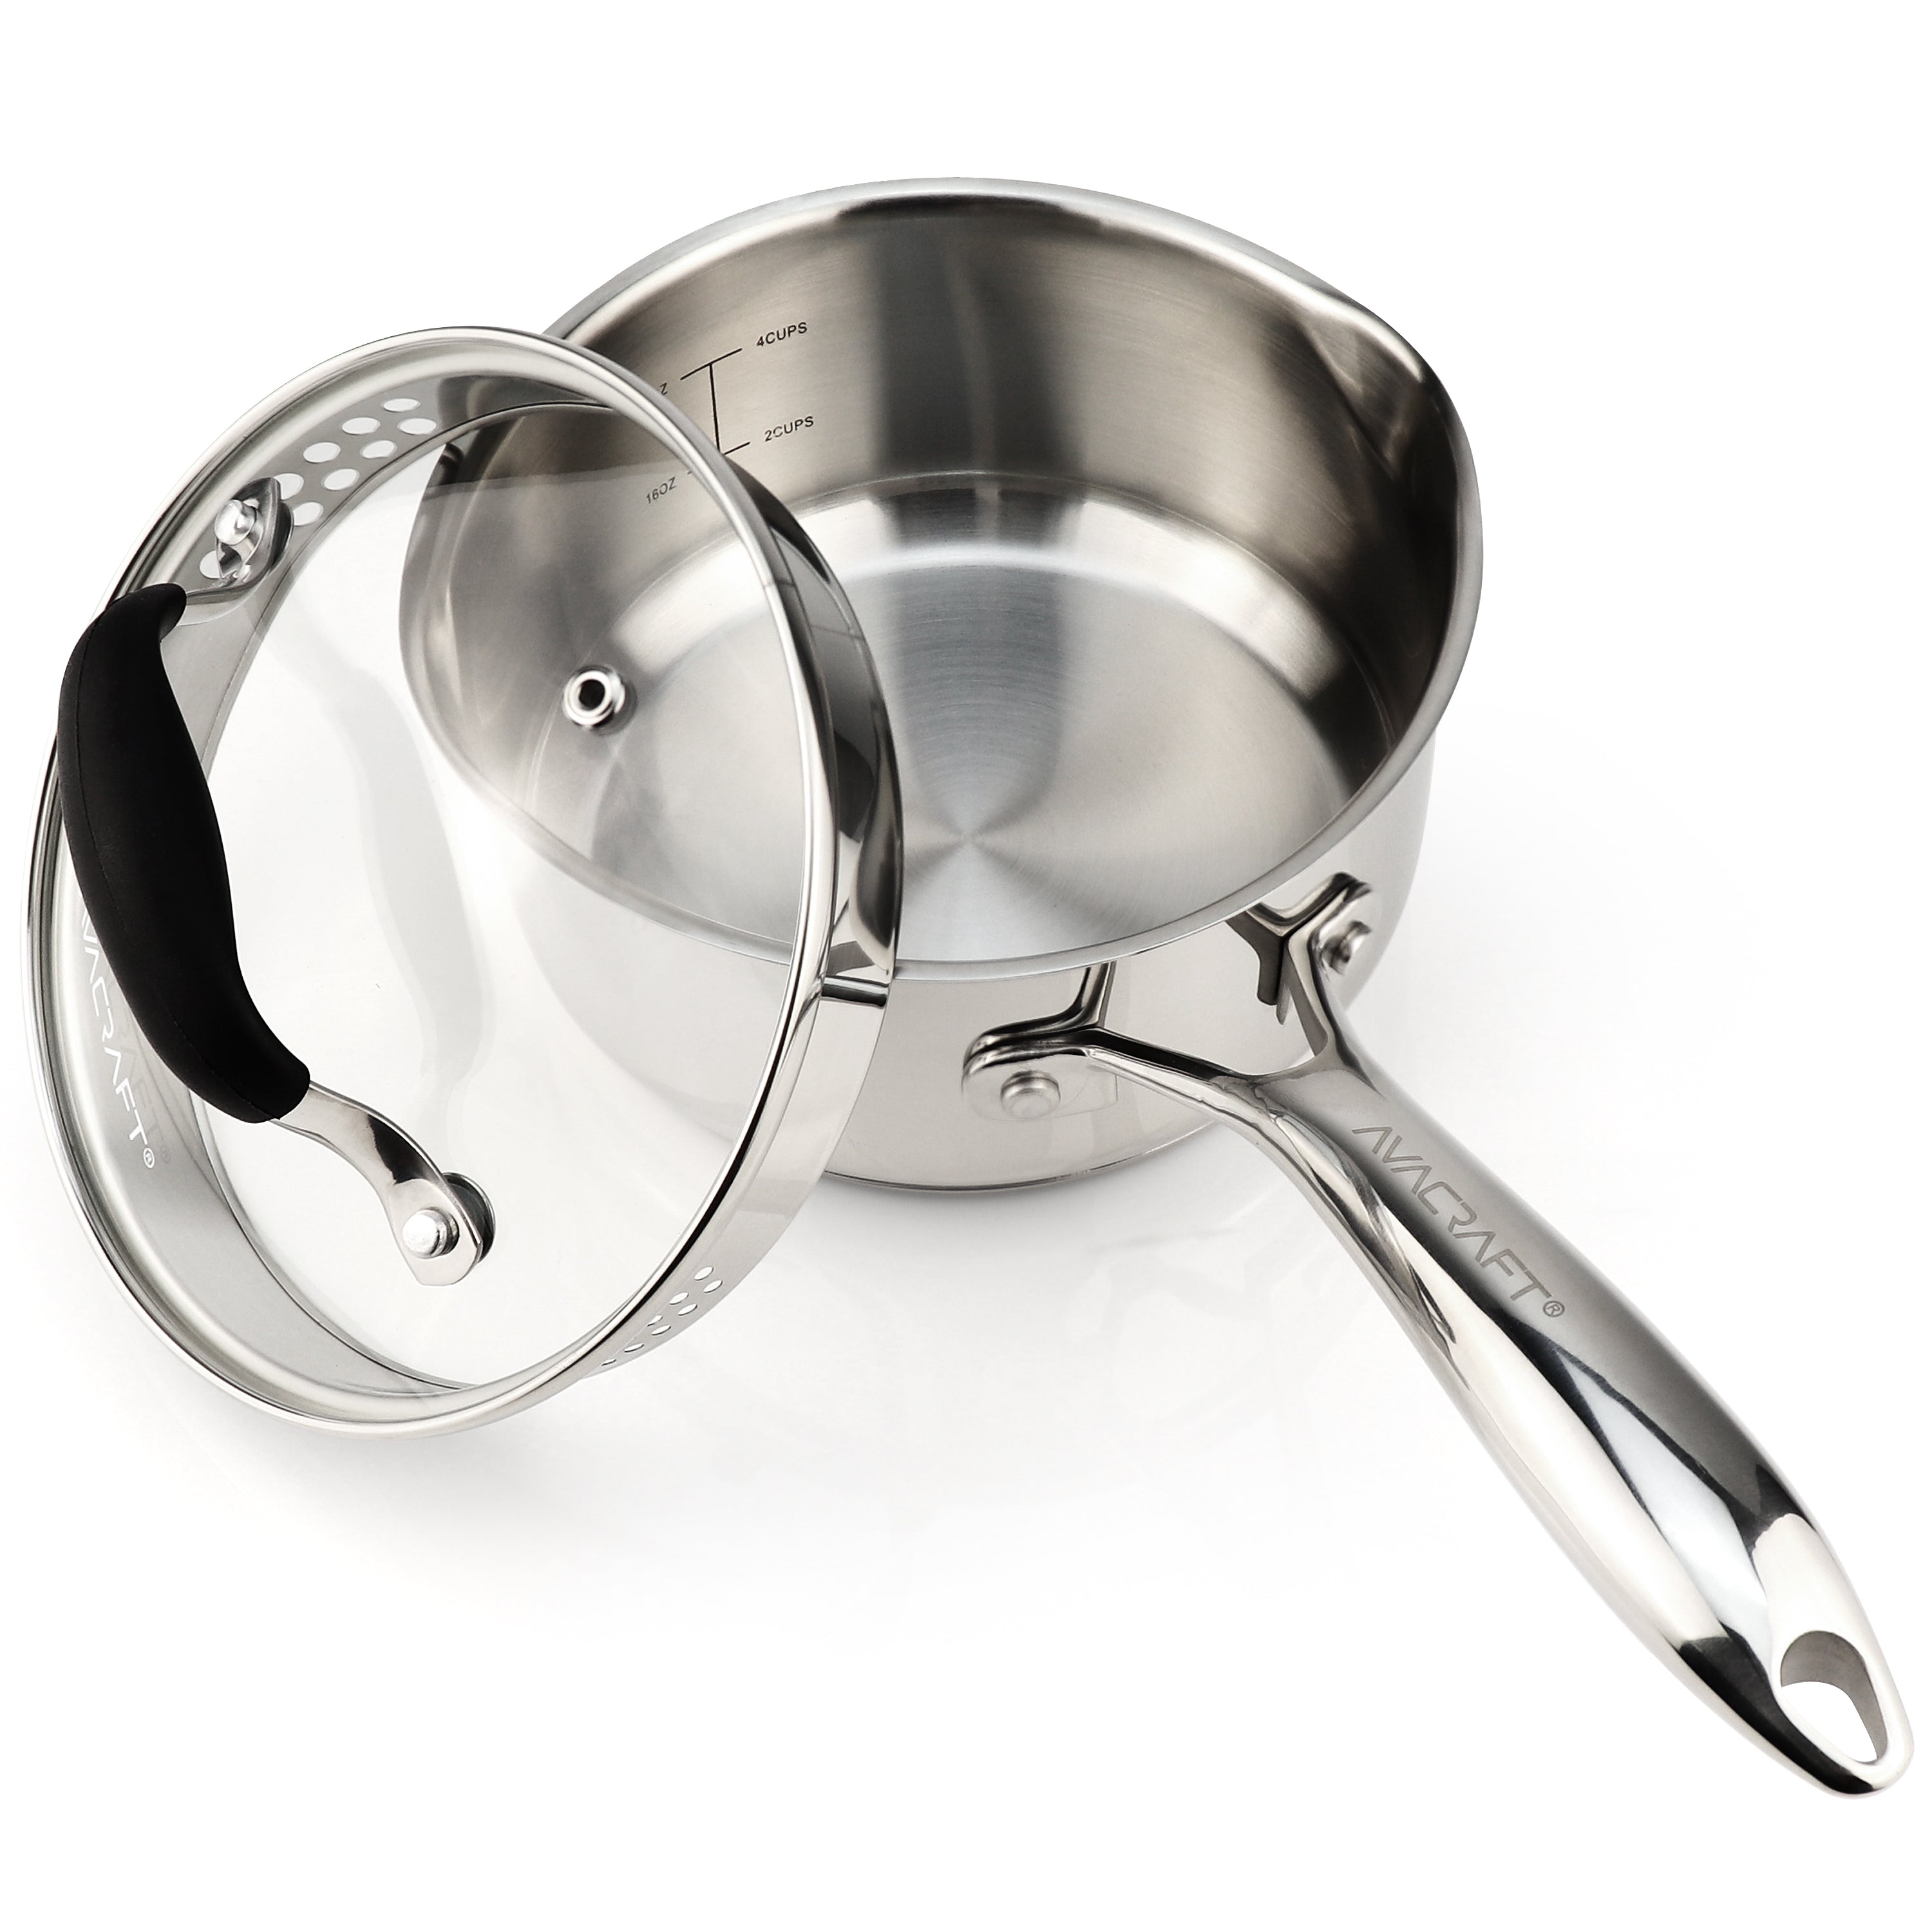 AVACRAFT Stainless Steel Saucepan with Strainer Glass Lid,Two Side Spouts for Easy Pour with Ergonomic Handle (Five-Ply Capsule Bottom, 1.5 Quart)